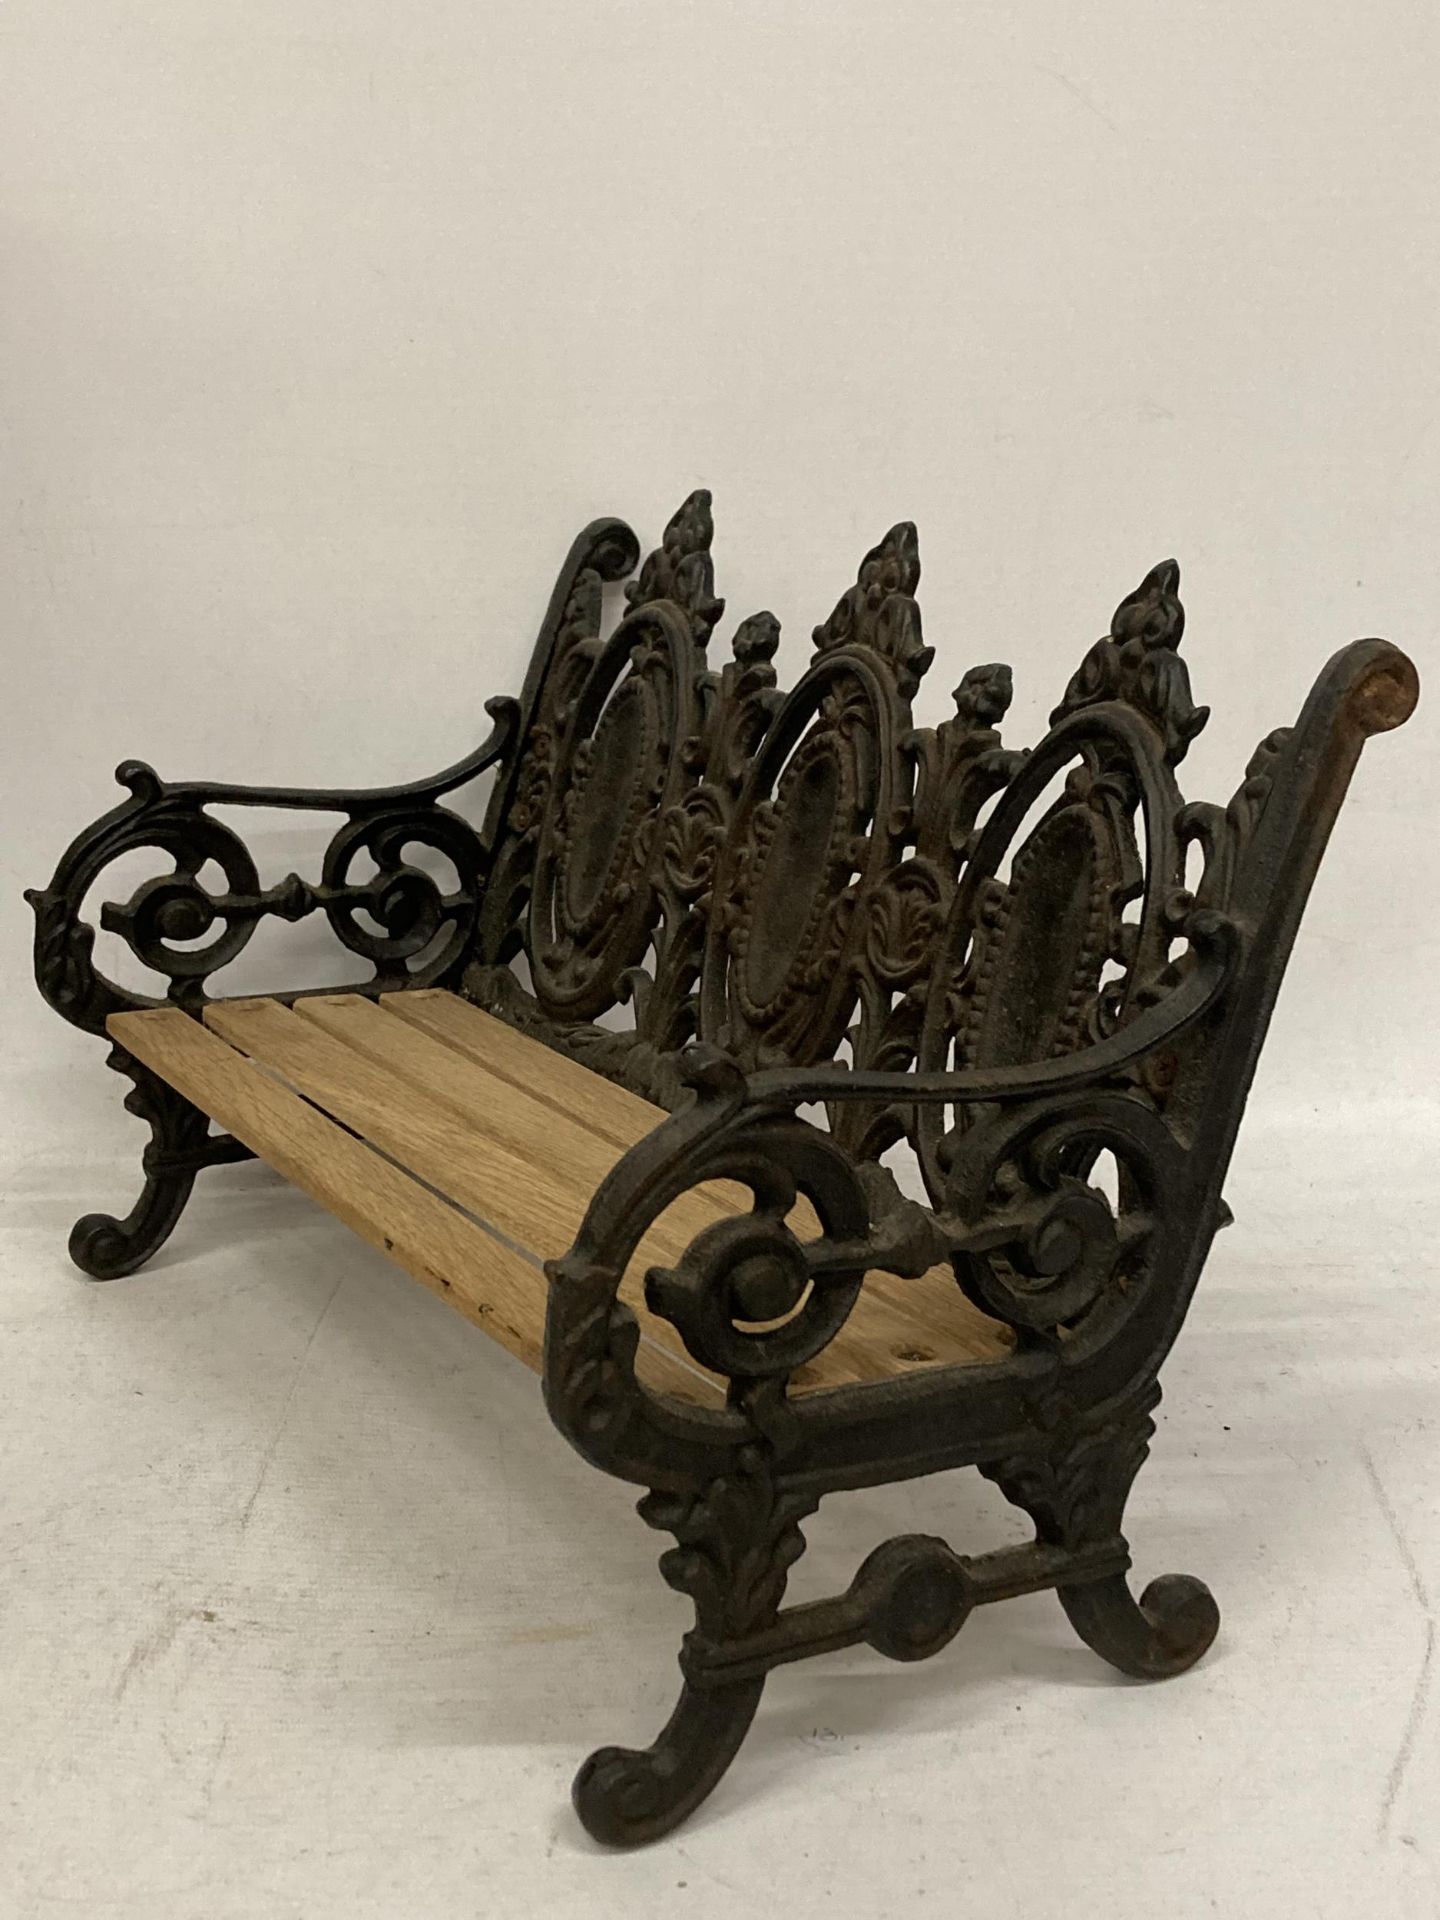 A TABLE TOP CAST VICTORIAN STYLE BENCH WITH WOODEN SLATTED SEAT - Image 2 of 3